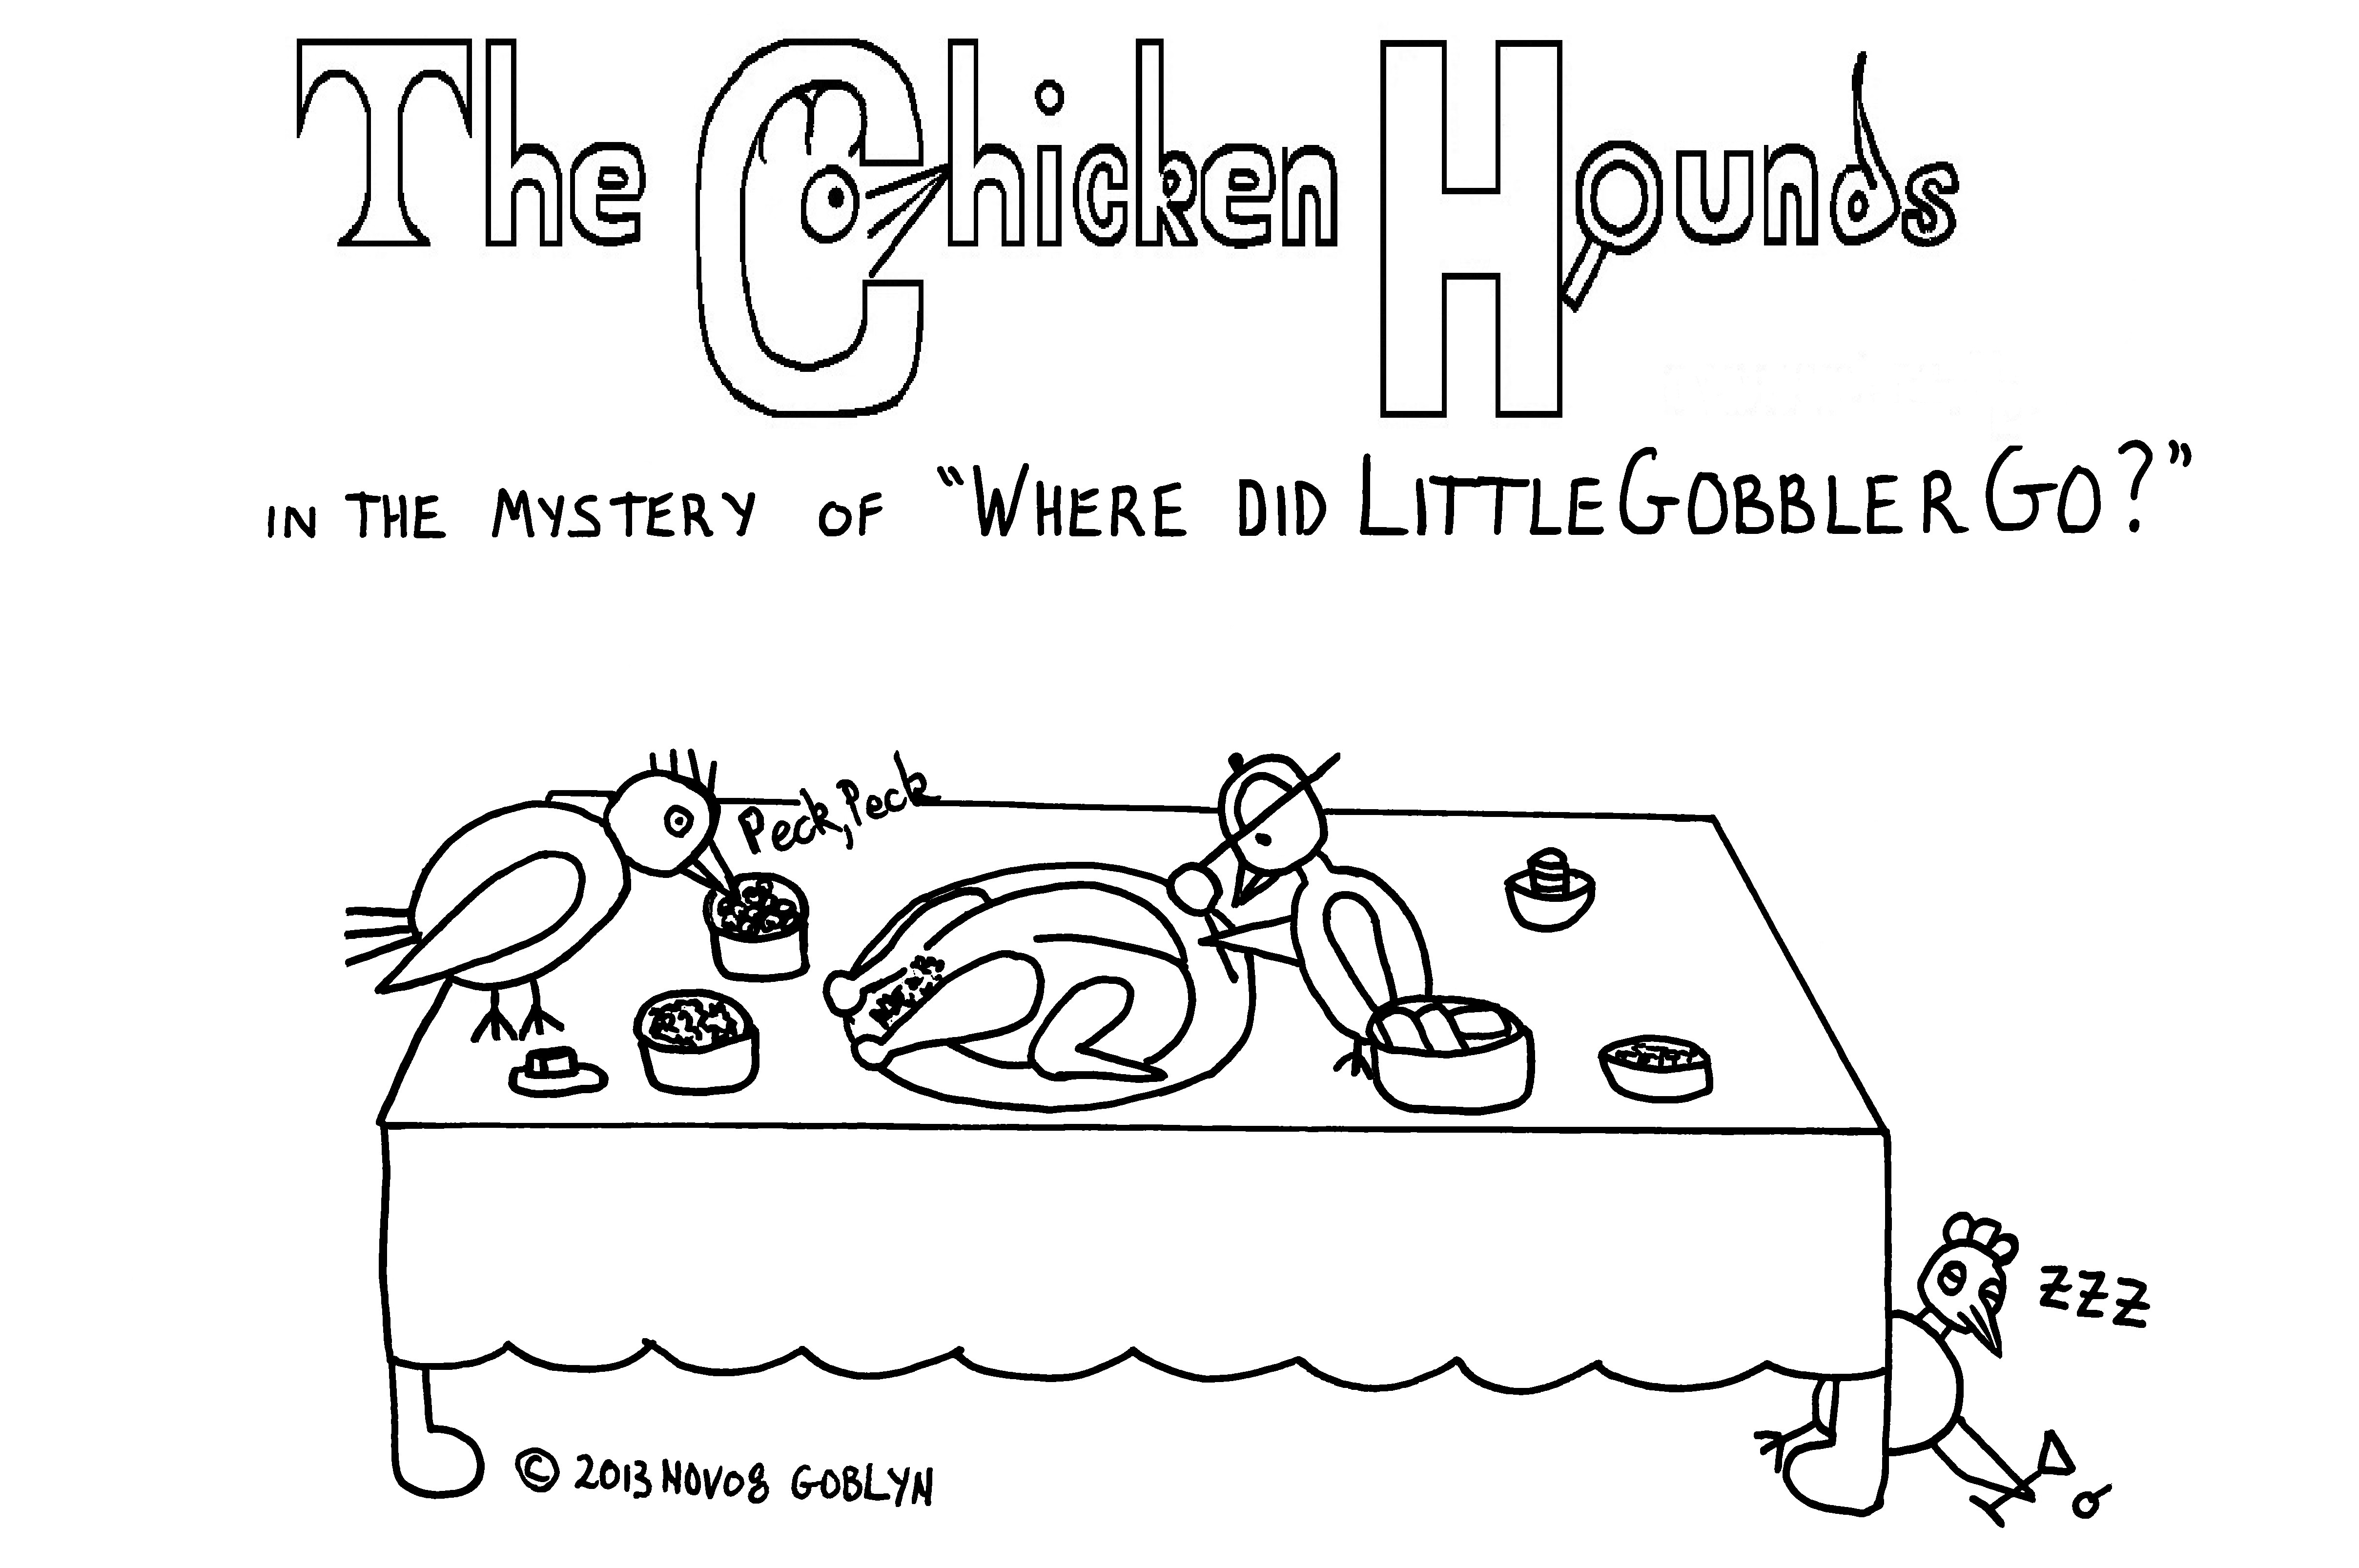 The Chicken Hounds in the Mystery of "Where Did Little Gobbler Go?"